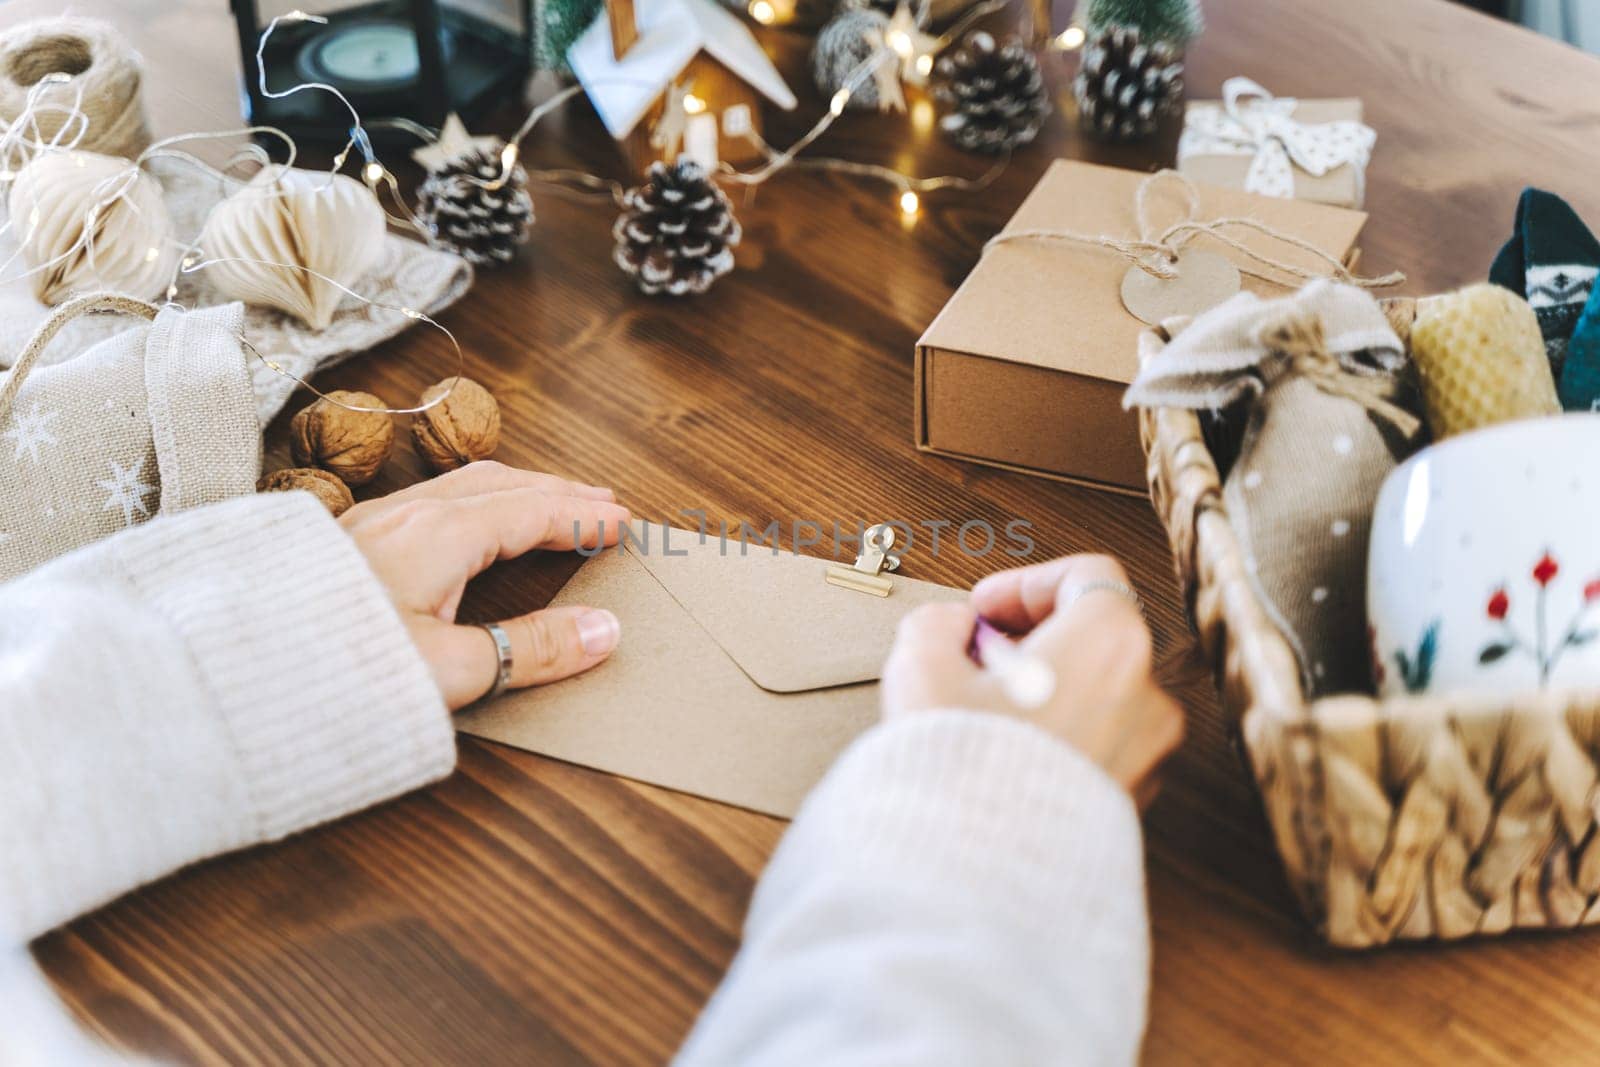 Woman s hands wrapping Christmas gift envelope, close up. Unprepared presents on white table with decor elements and items Christmas or New year DIY packing Concept by Ostanina